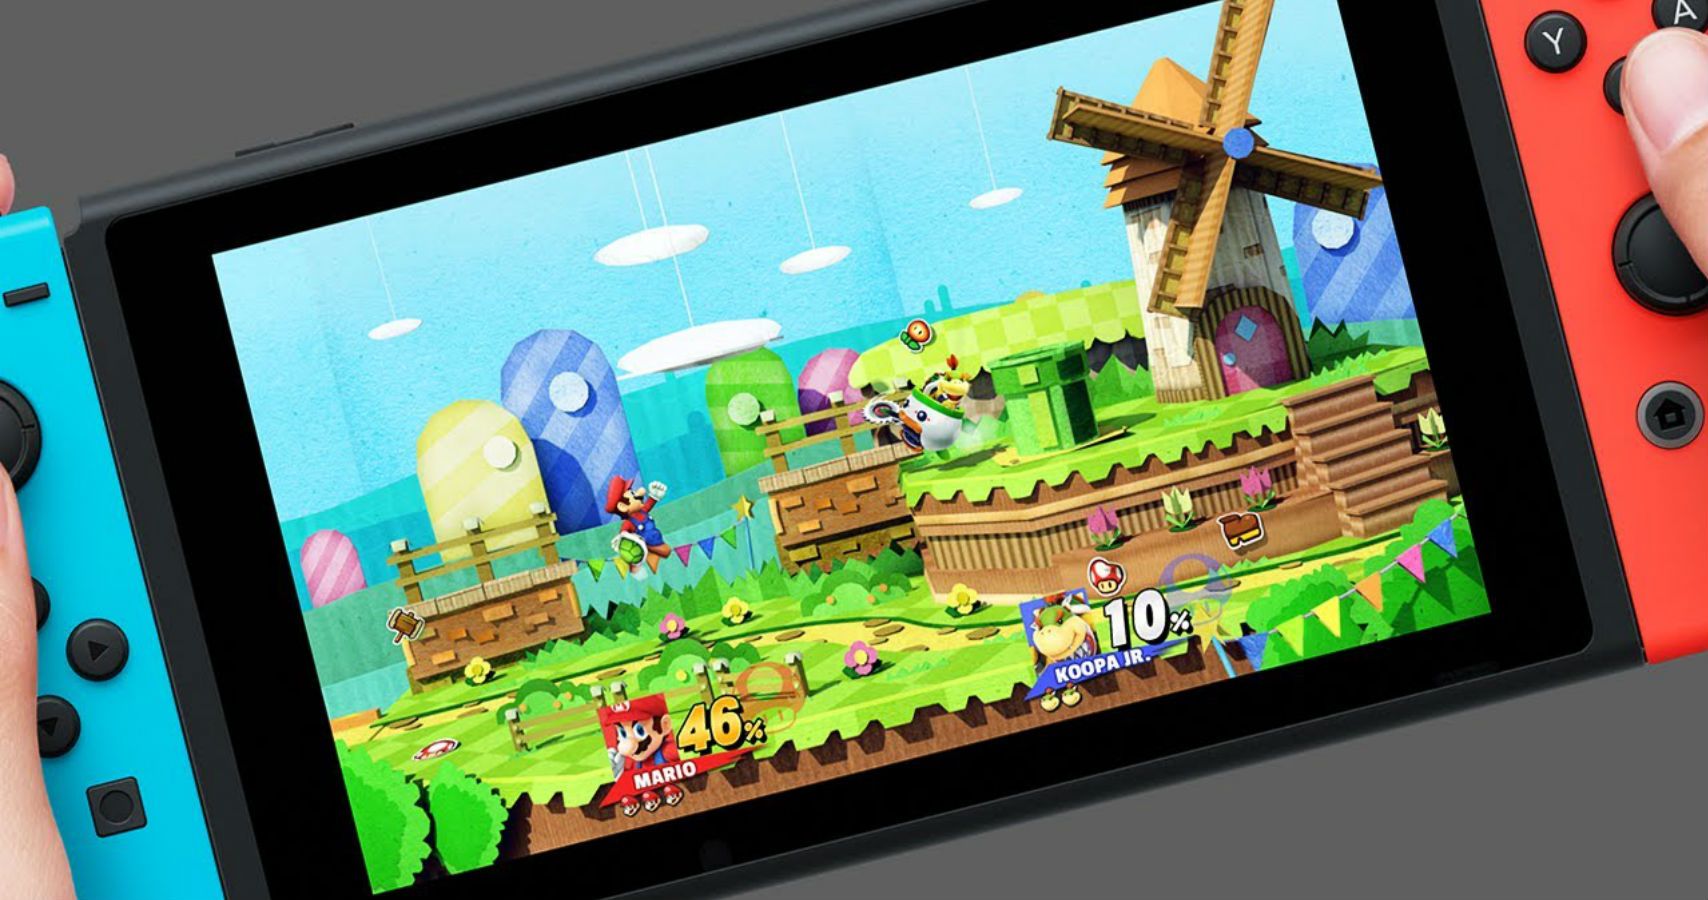 Man Who Leaked Nintendo Switch Faces Prison Time For Hacking (And Child Pornography)